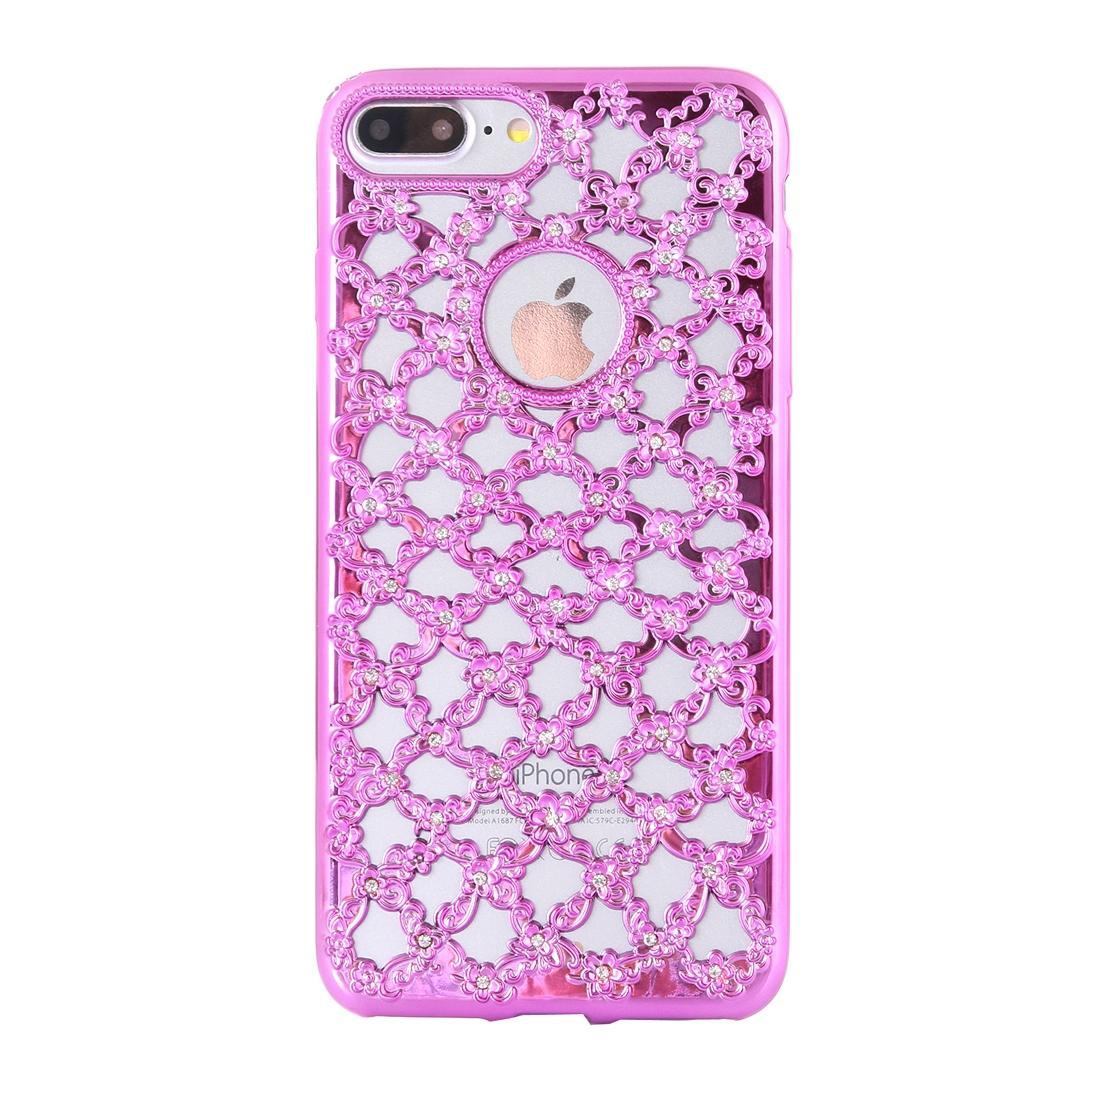 For iPhone SE (2020),8 & 7 Case,Hollow Diamond Encrusted Cover,Purple